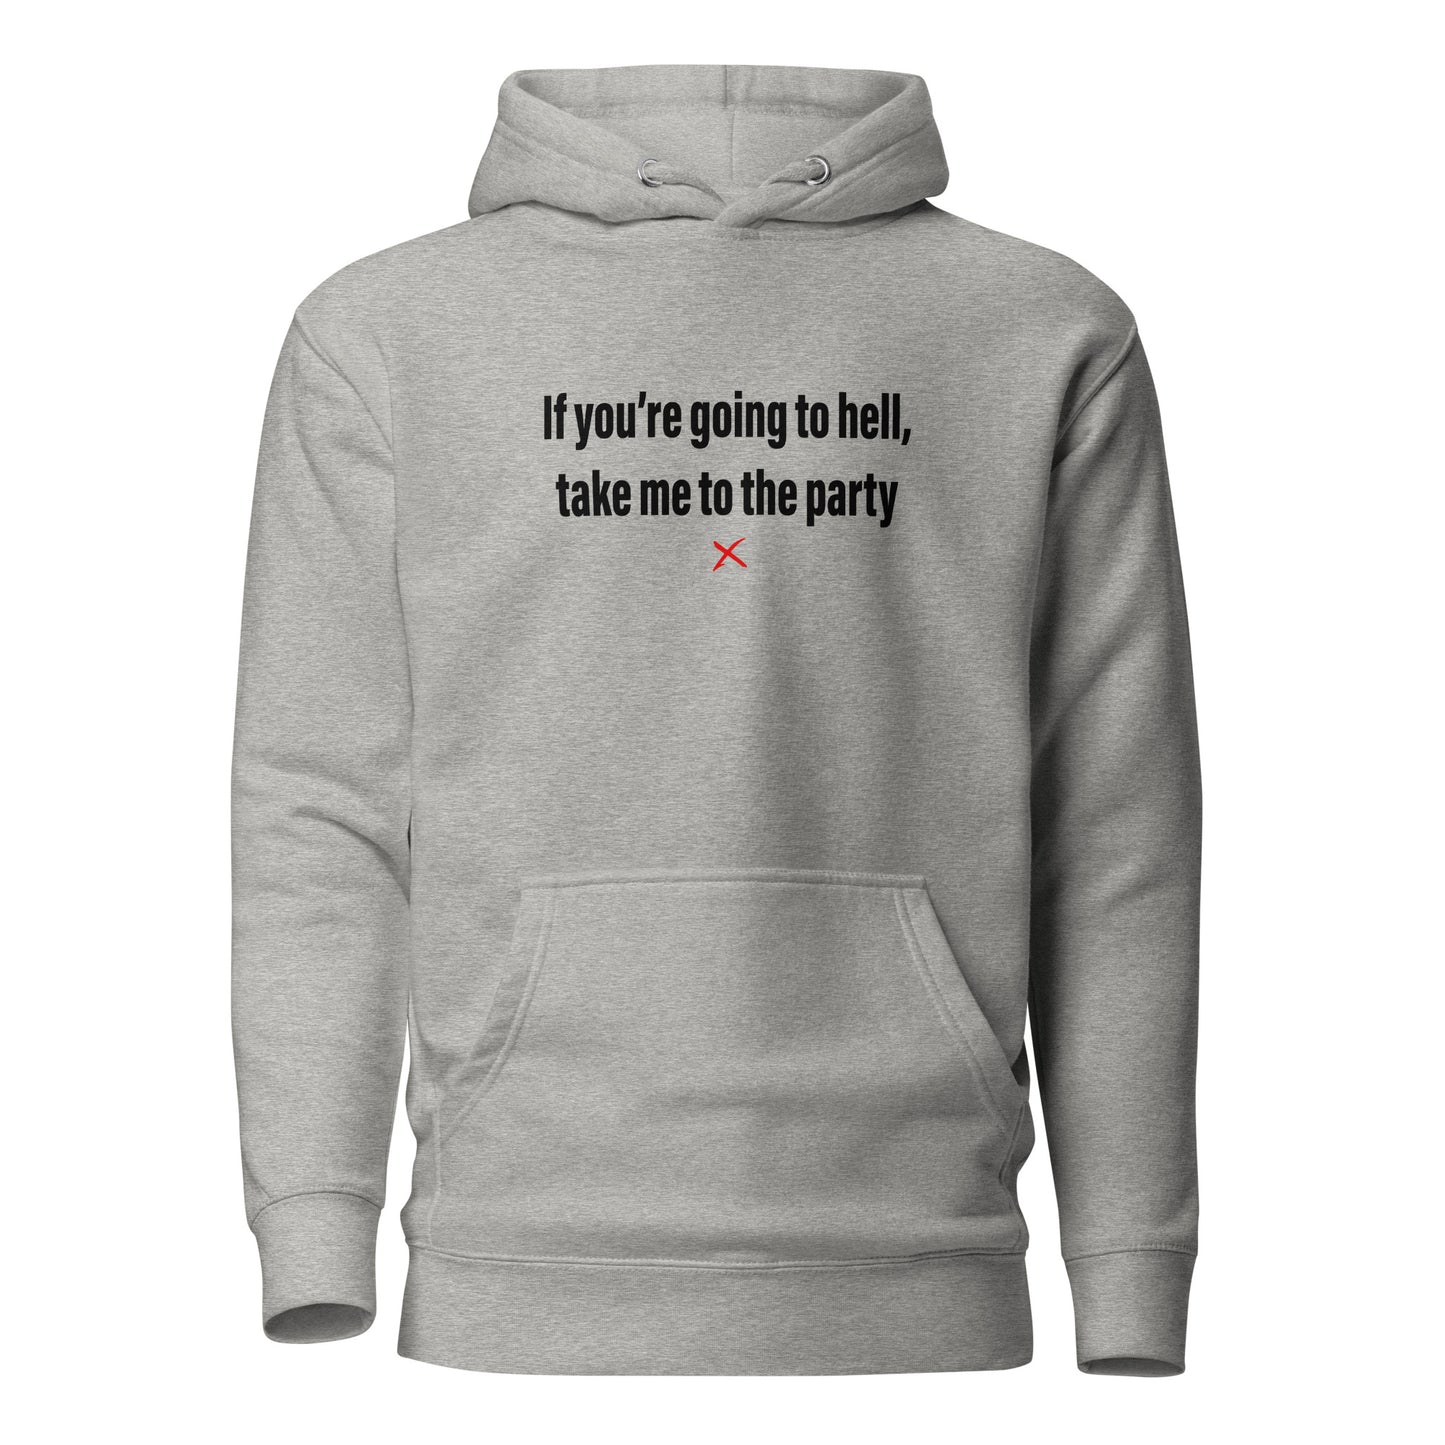 If you're going to hell, take me to the party - Hoodie